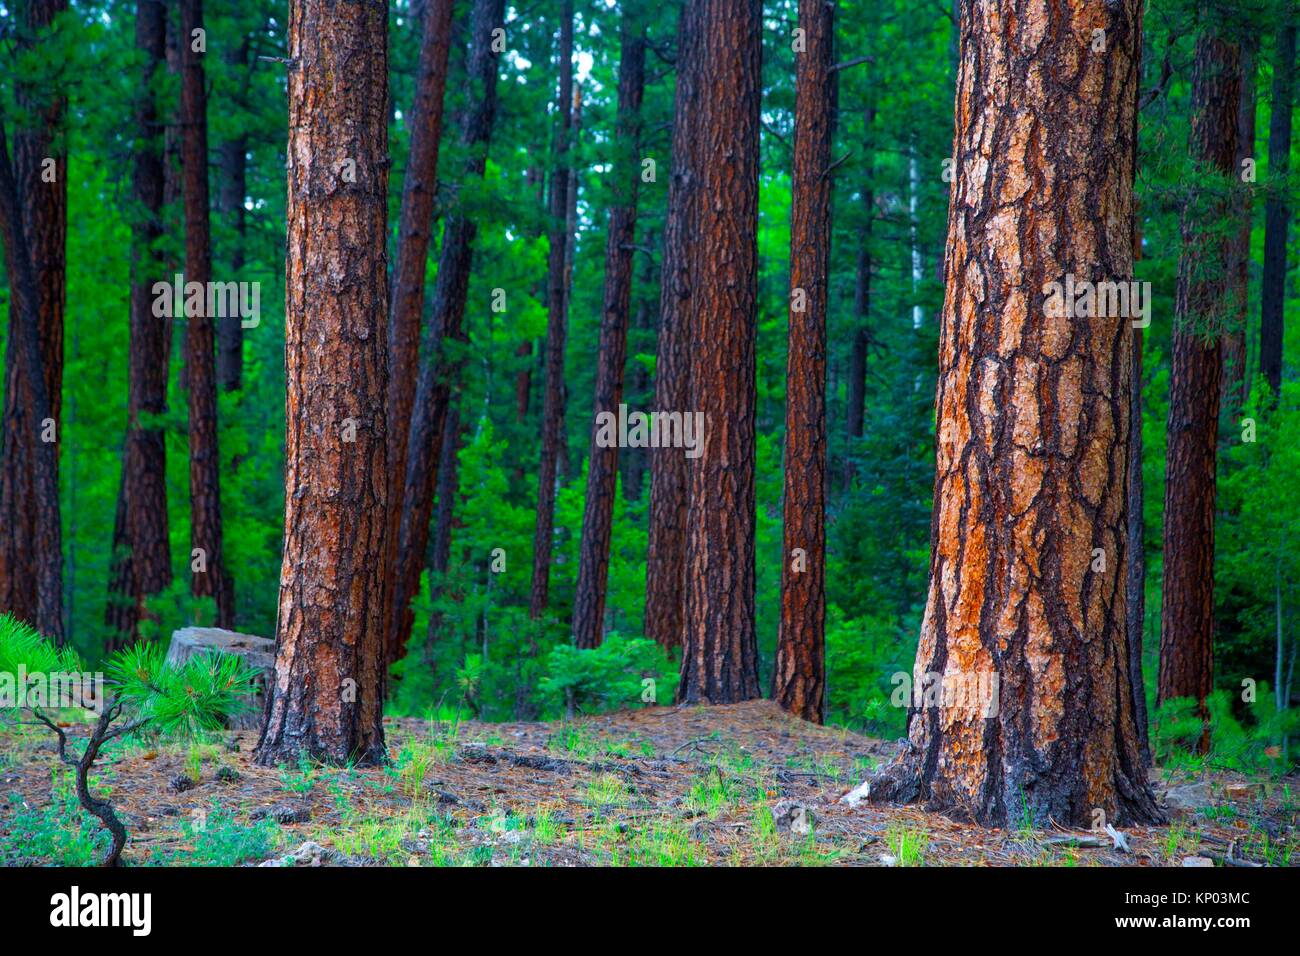 Ponderosa Pines thrive at The Kaibab National Forest near the north rim of The Grand Canyon, Arizona. Stock Photo